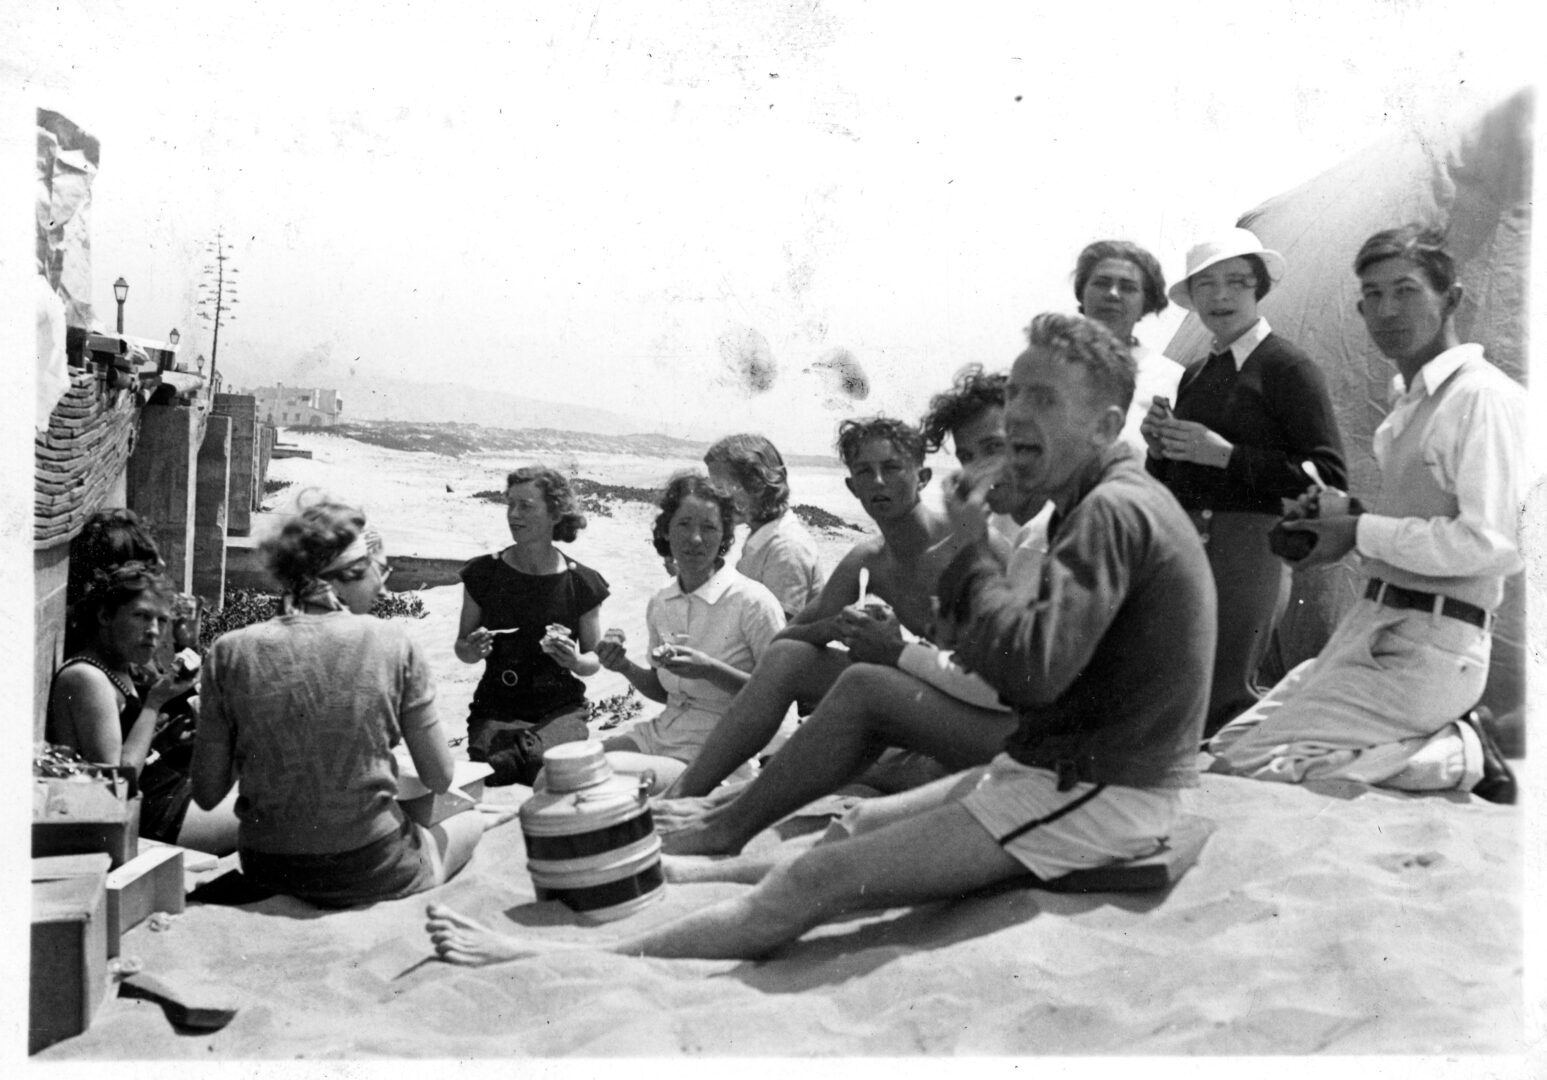 Men and women sit on the beach in Ensenada eating and drinking